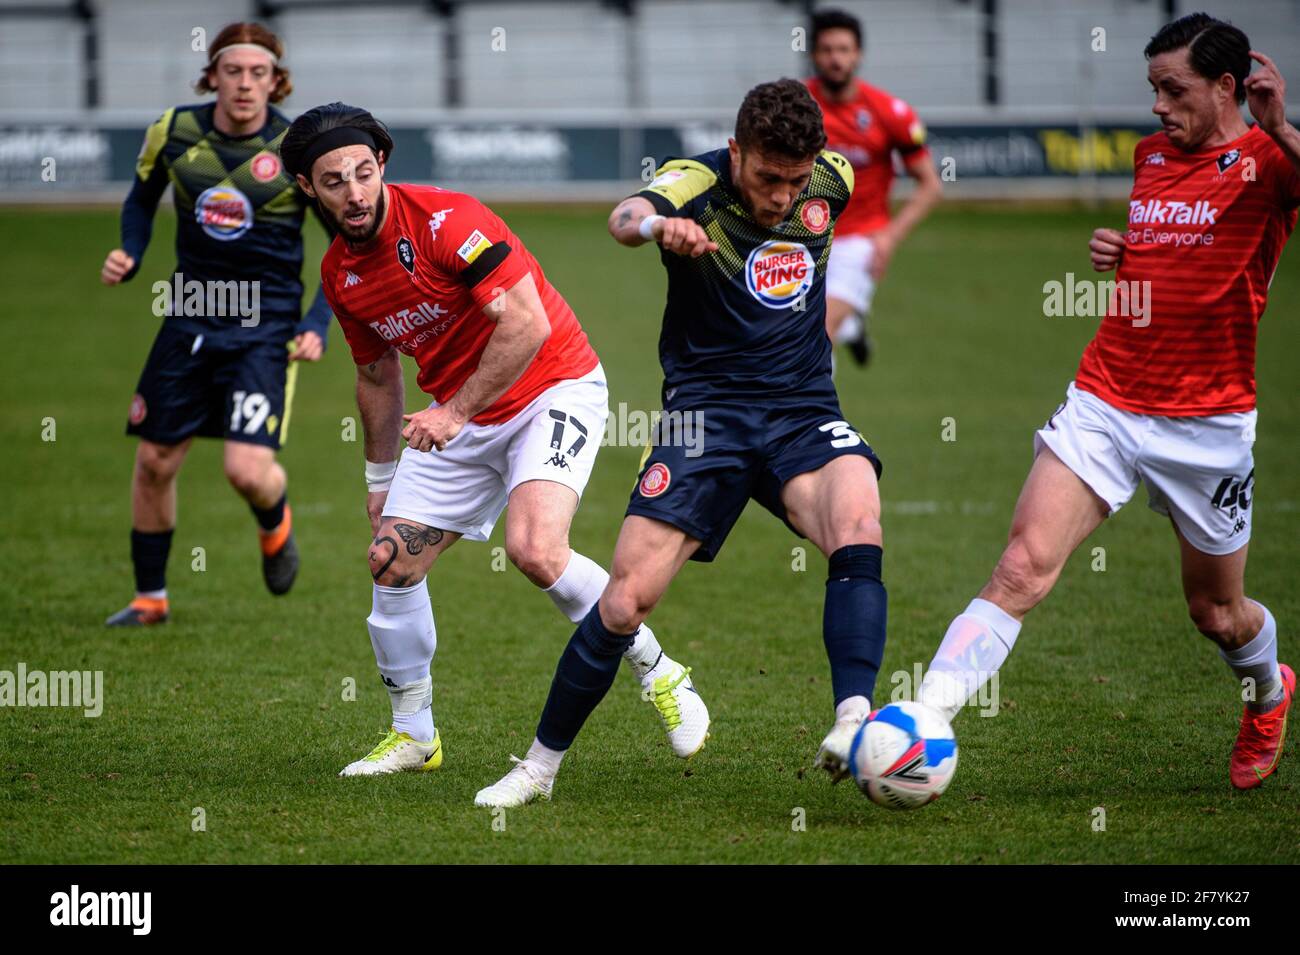 SALFORD, UK. APRIL 10TH: Ben Coker of Stevenage FC tackles Richie Towell of Salford City FC during the Sky Bet League 2 match between Salford City and Stevenage at Moor Lane, Salford on Saturday 10th April 2021. (Credit: Ian Charles | MI News) Credit: MI News & Sport /Alamy Live News Stock Photo